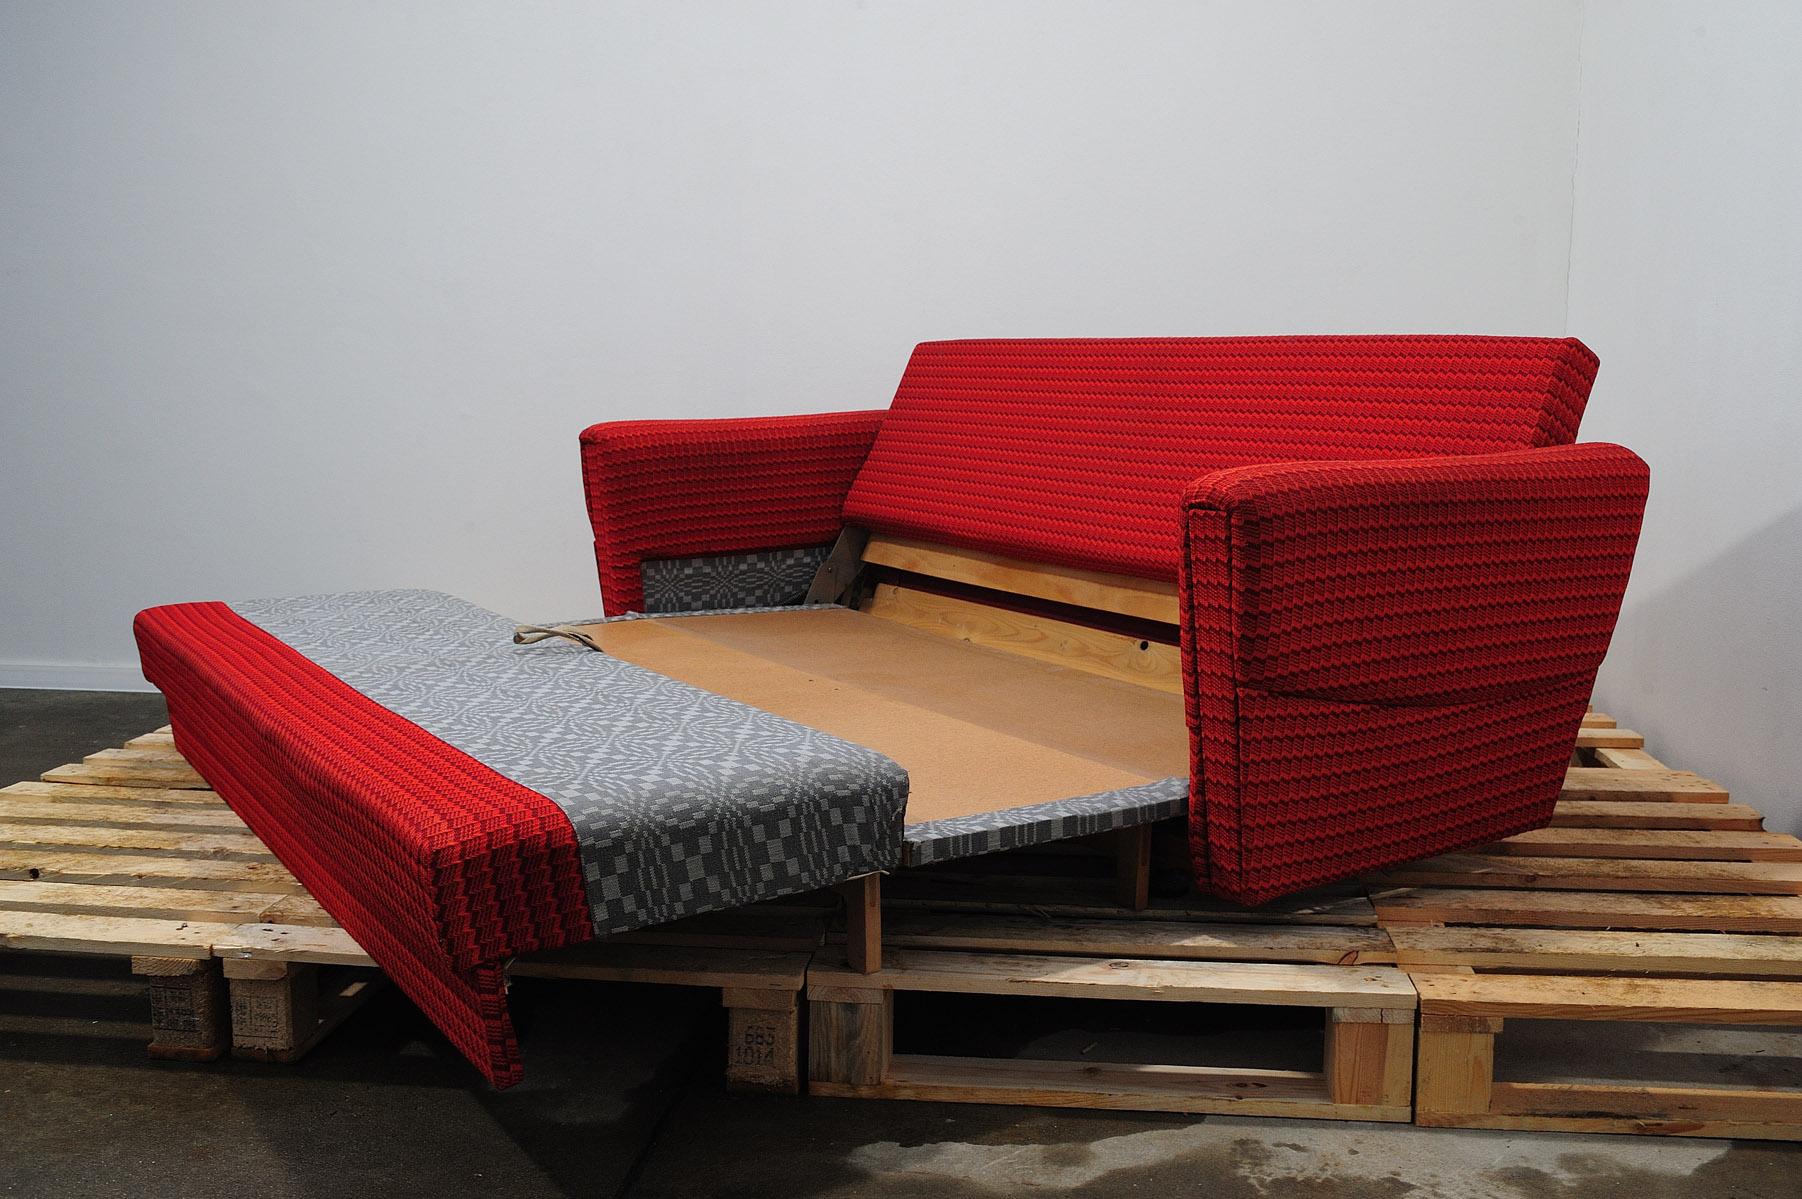 This living room set is a typical example of furniture design of the 1970/1980´s in the former Czechoslovakia.

The furniture is very comfortable.
It consists of one sofa and two armchairs on wheels. The set has original red upholstery, all in good